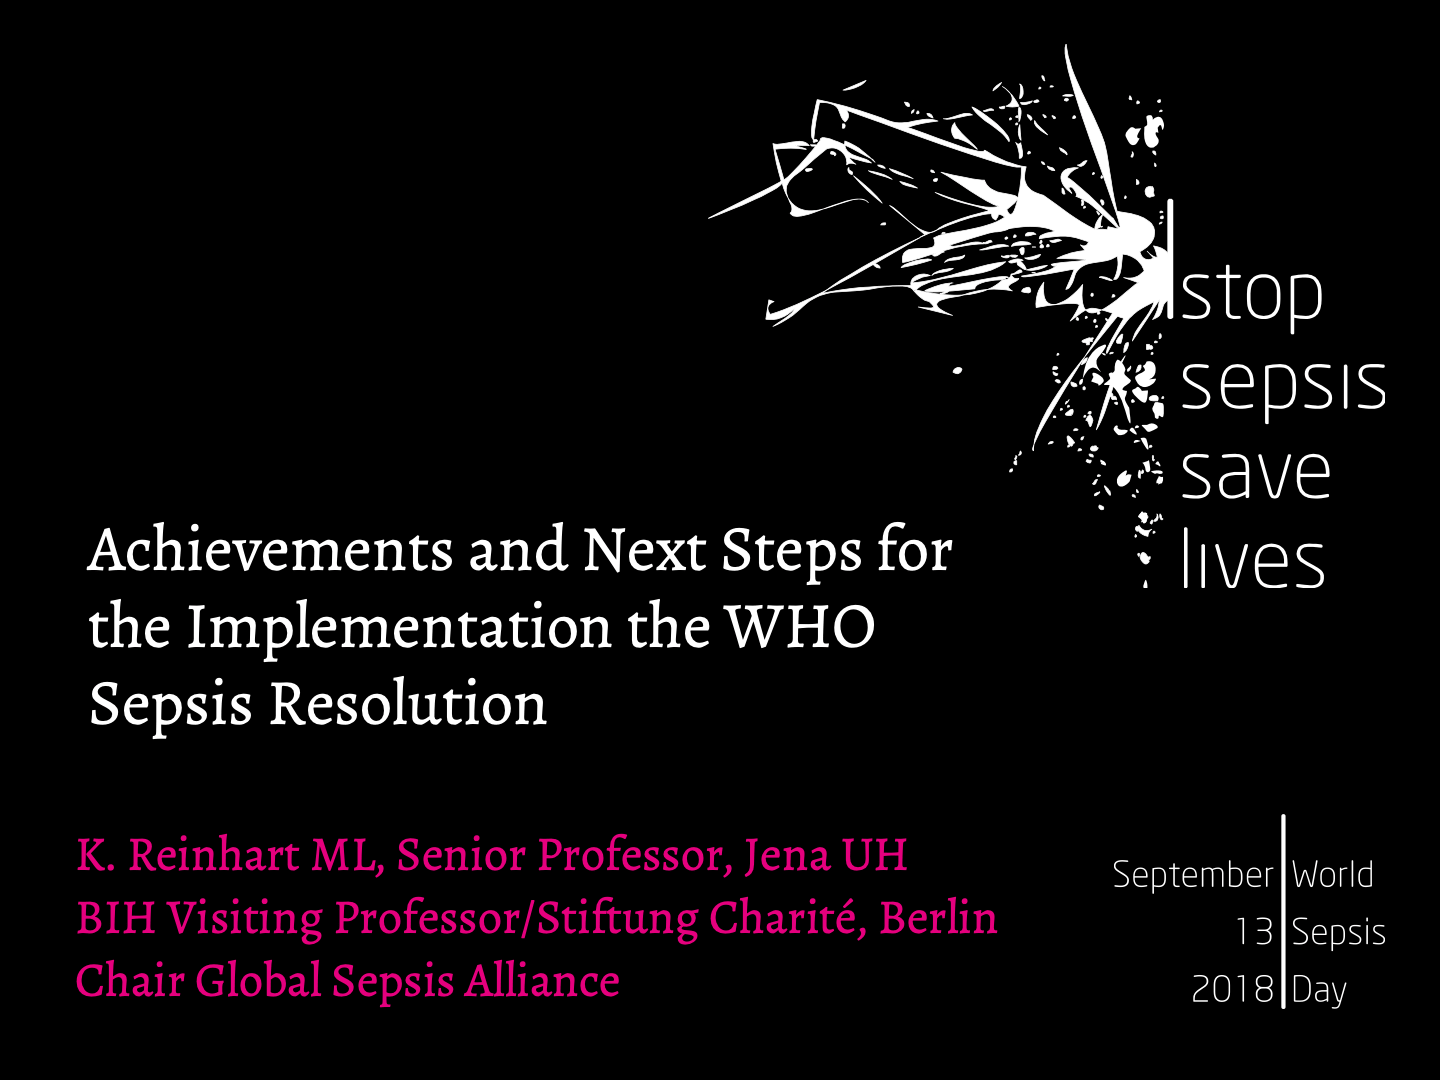 Strategy of the GSA to Implement WHO Sepsis Resolution1.png